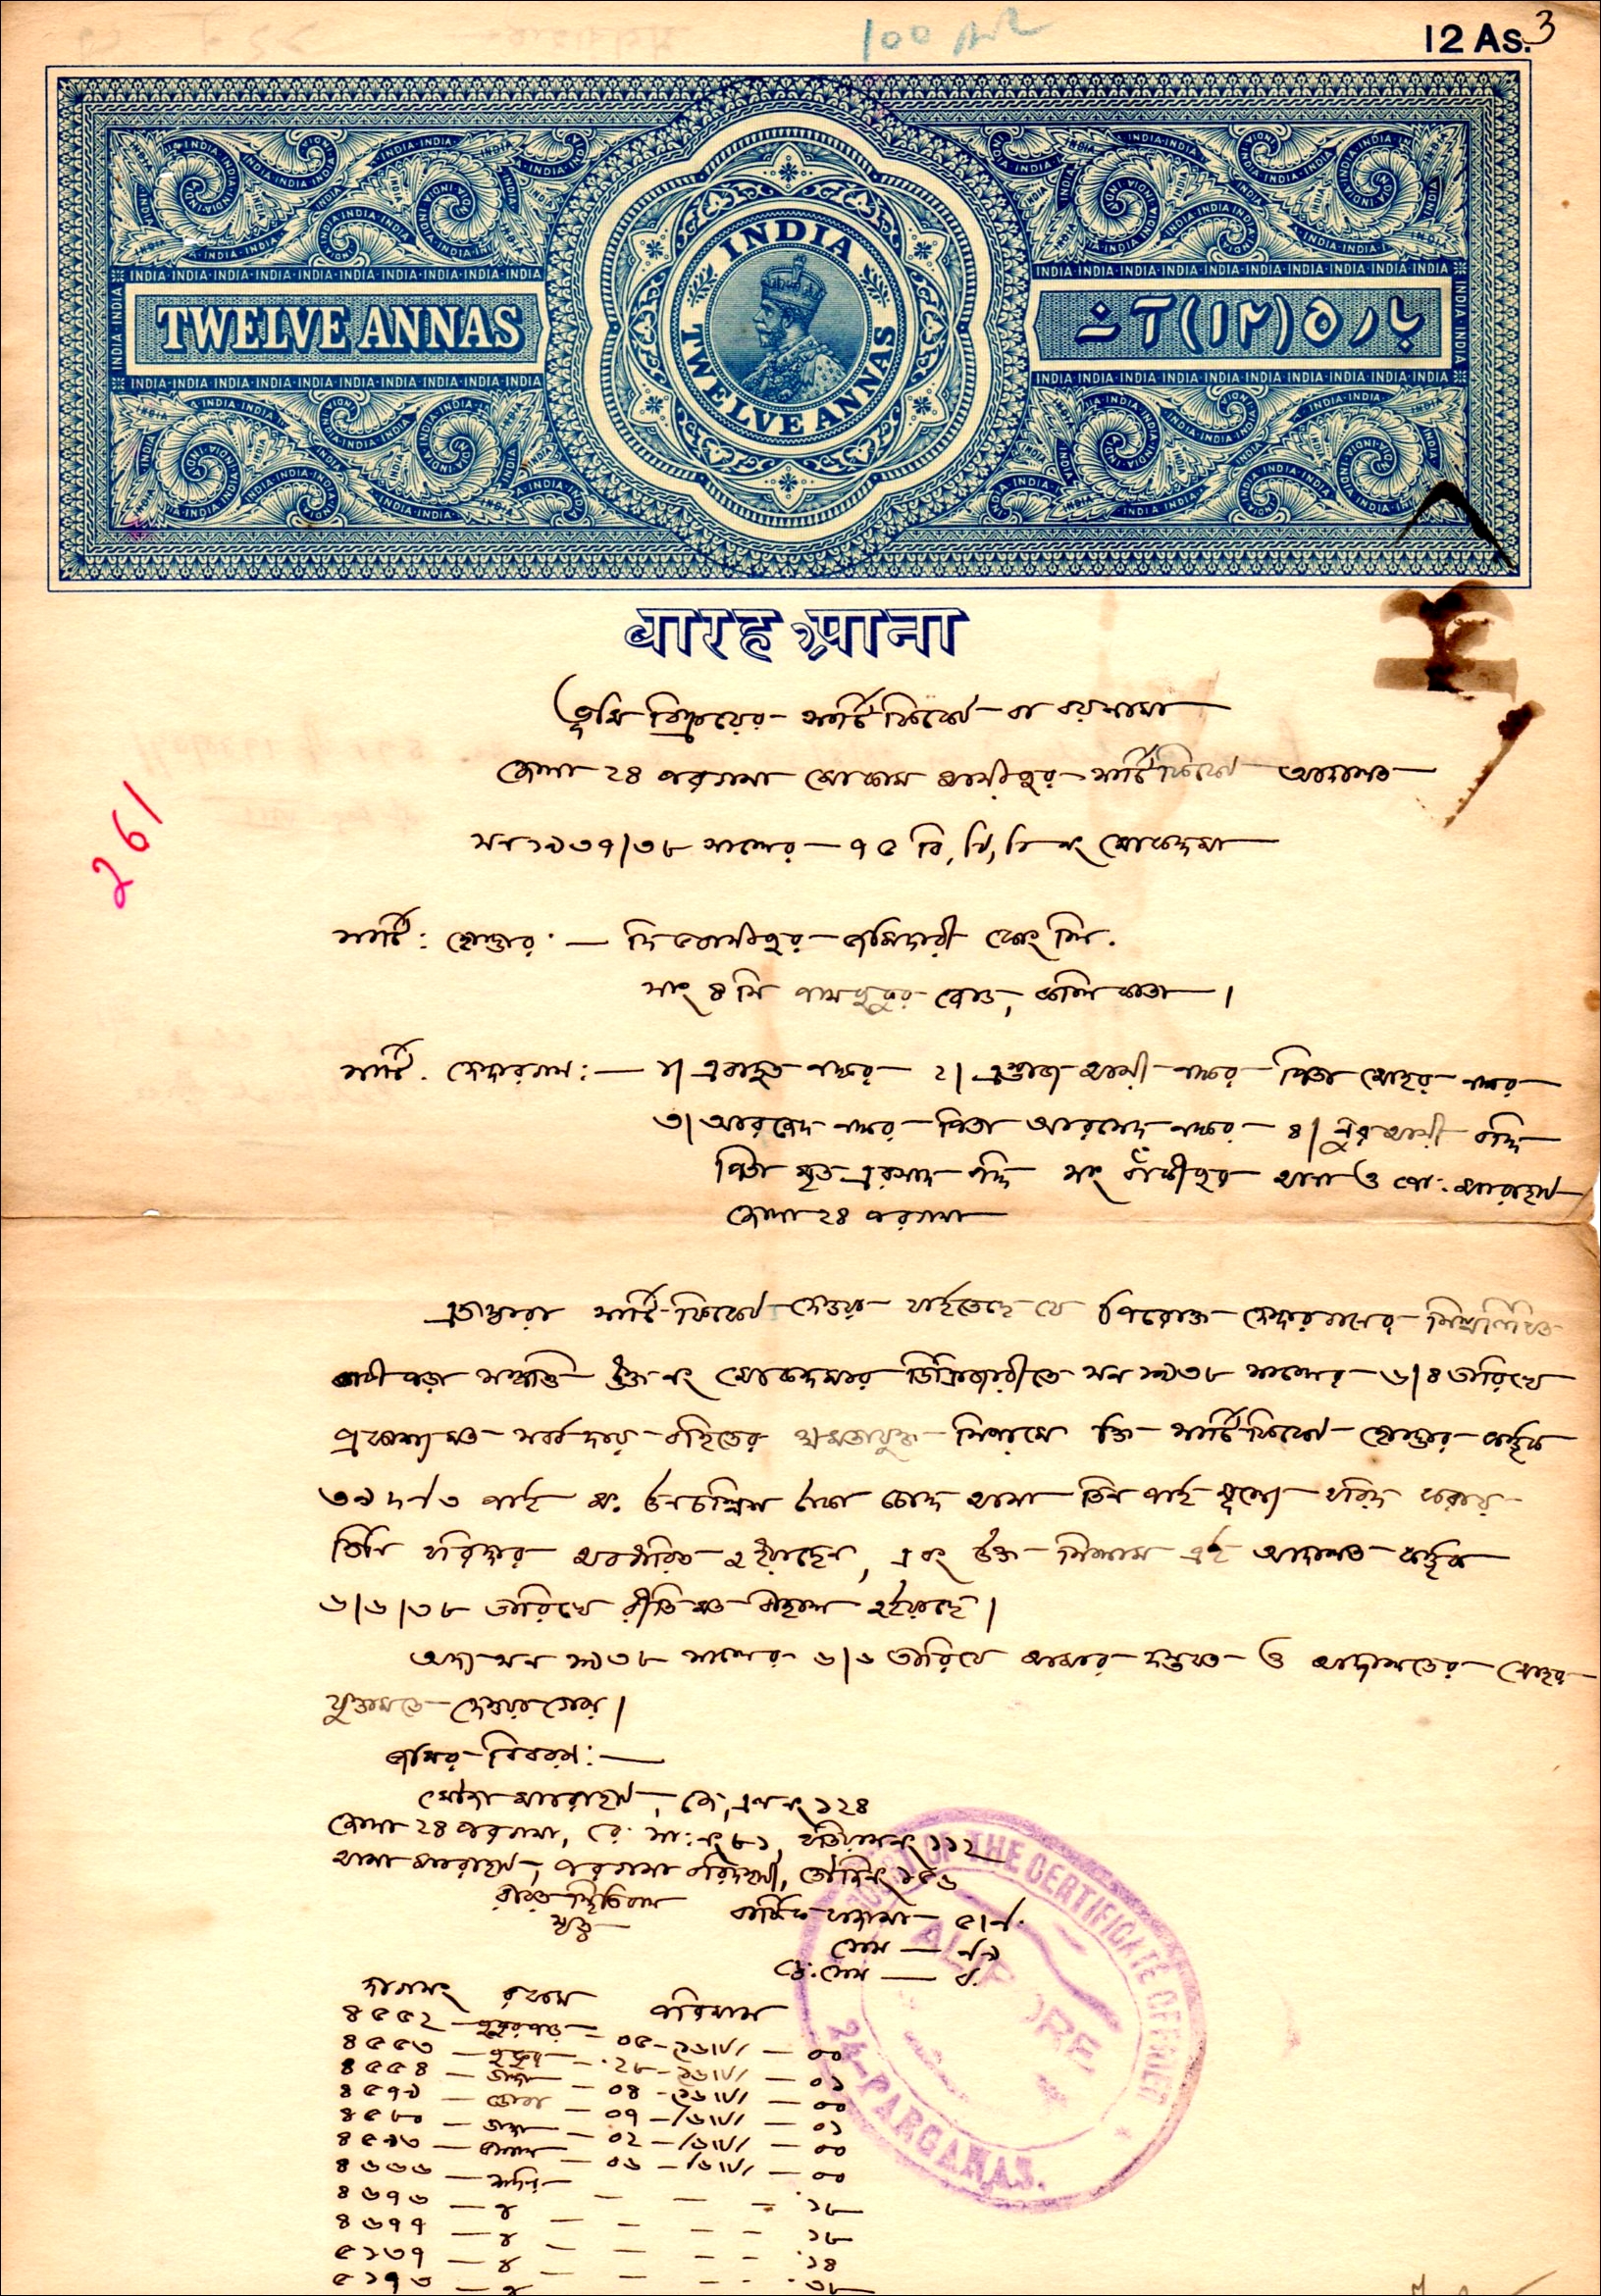 Stamped document